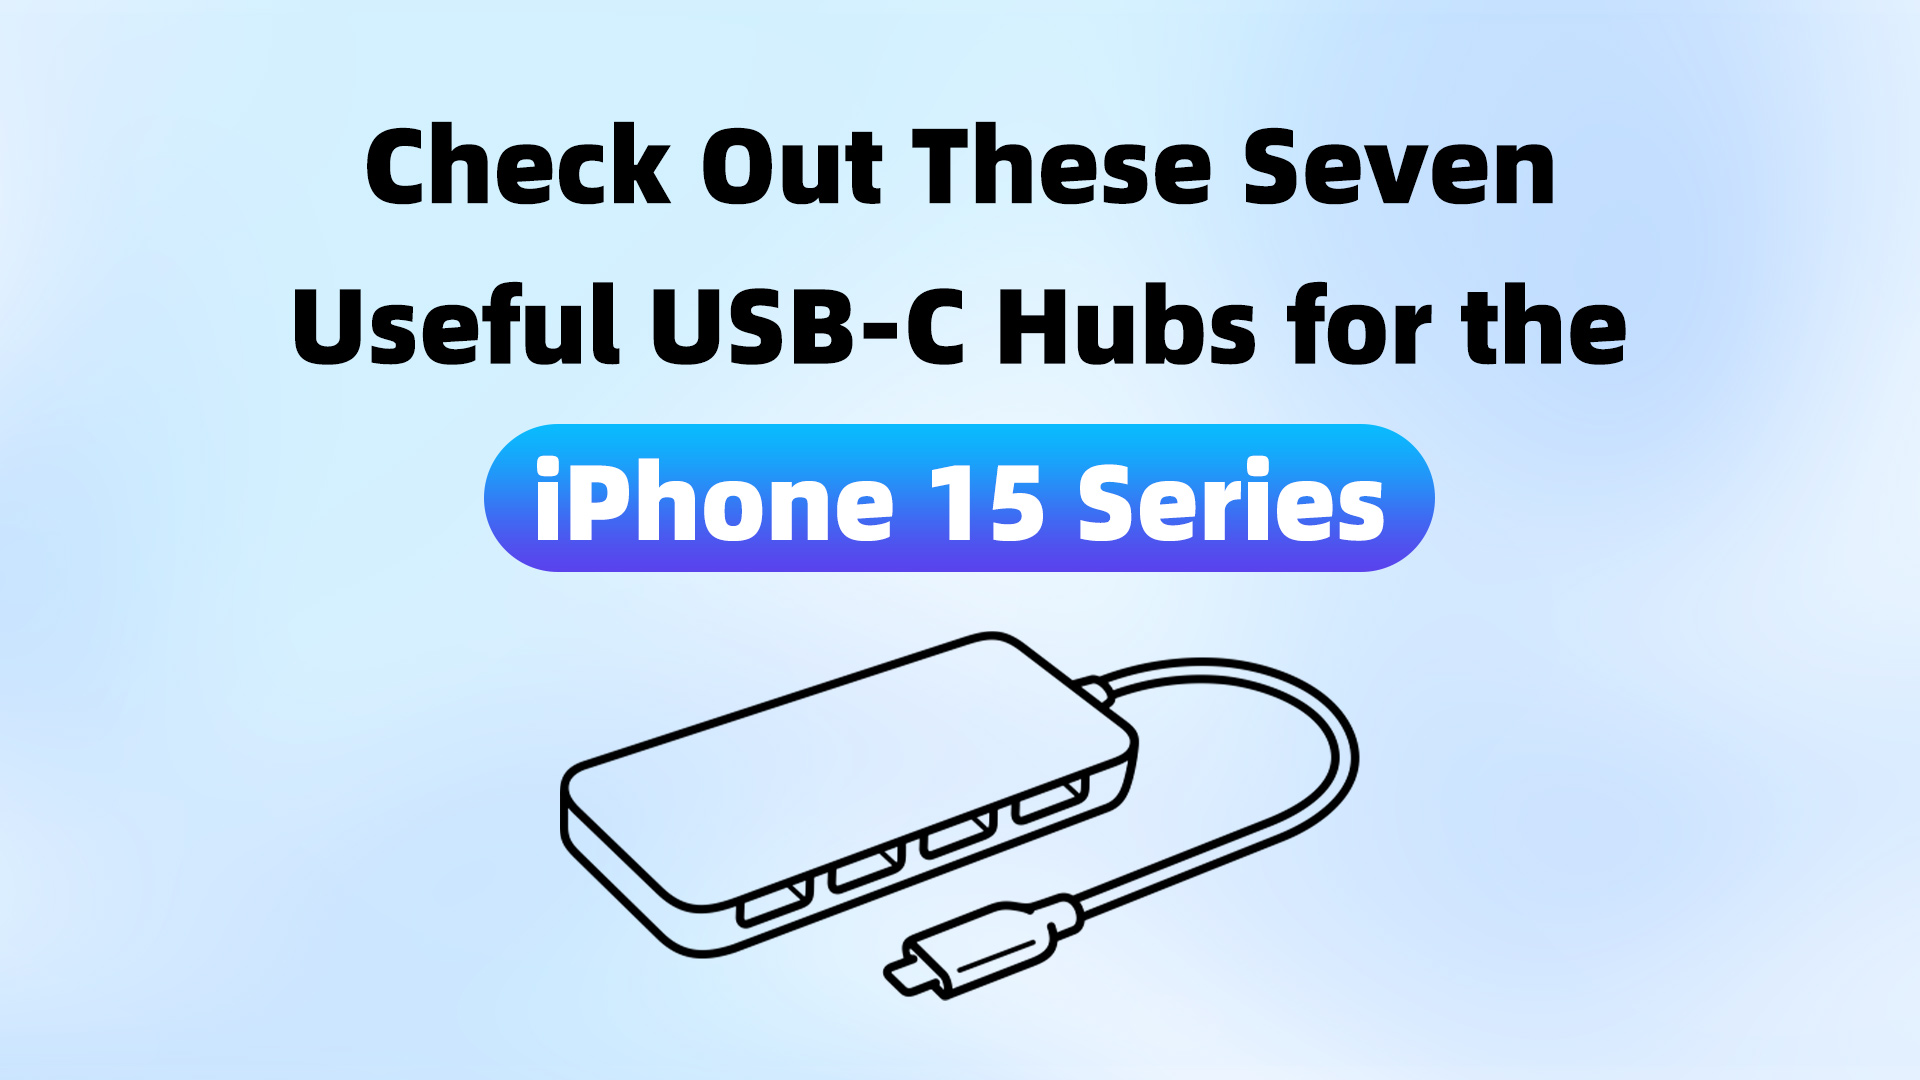 5 Unique Ways to Fully Utilize USB-C on the iPhone 15, by The Useful Tech, Mac O'Clock